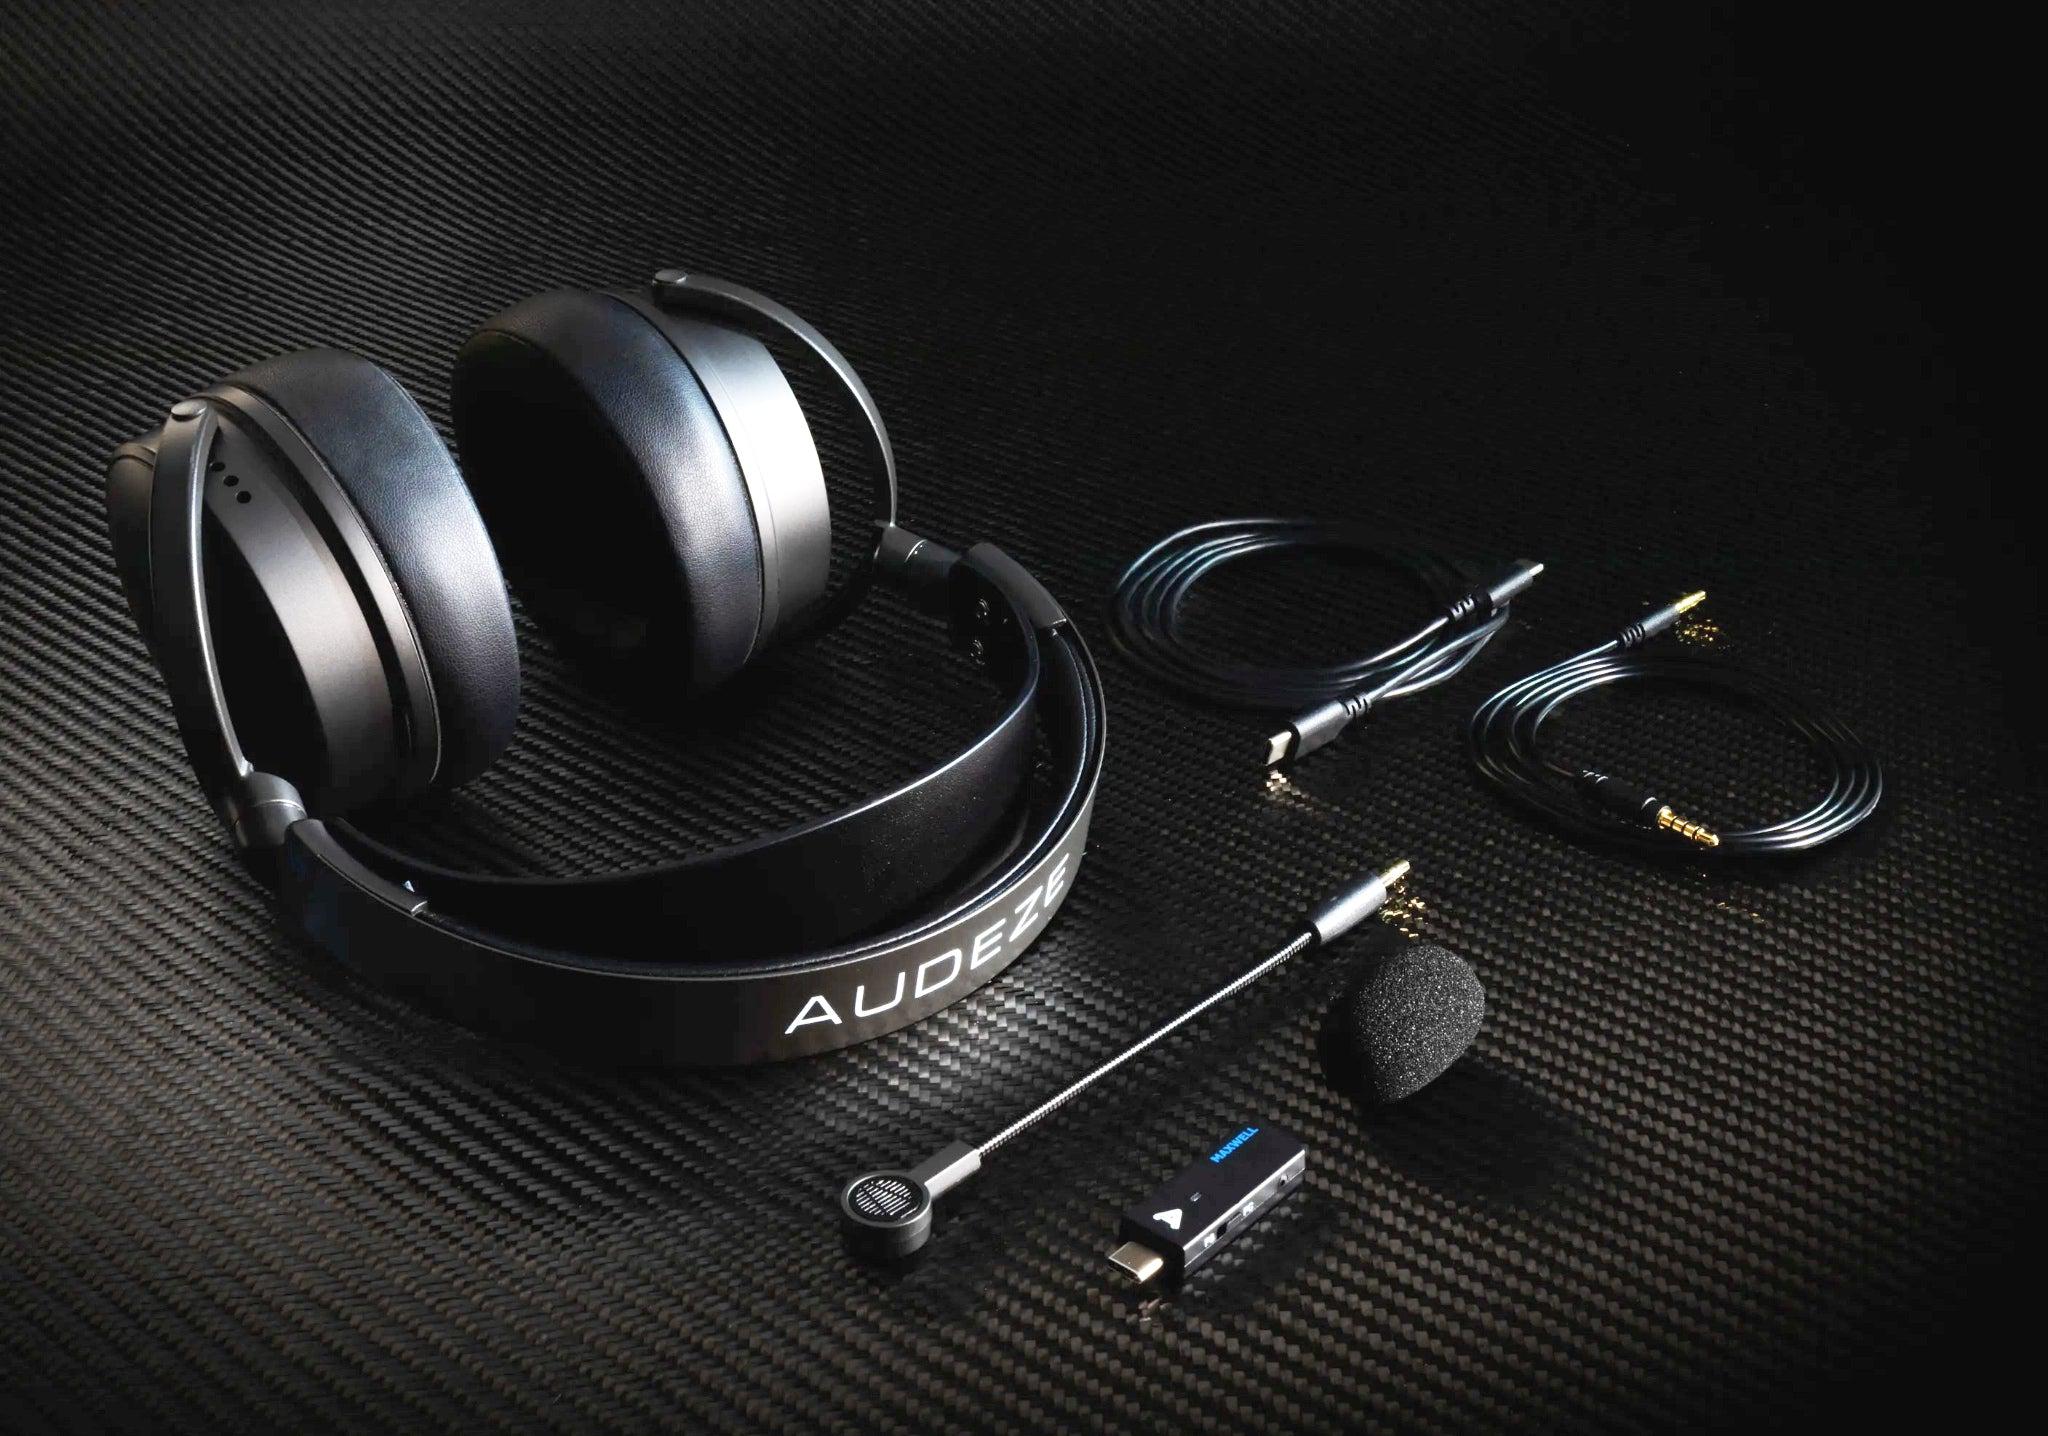 Audeze Maxwell headphones and all included accessories on dark metal surface